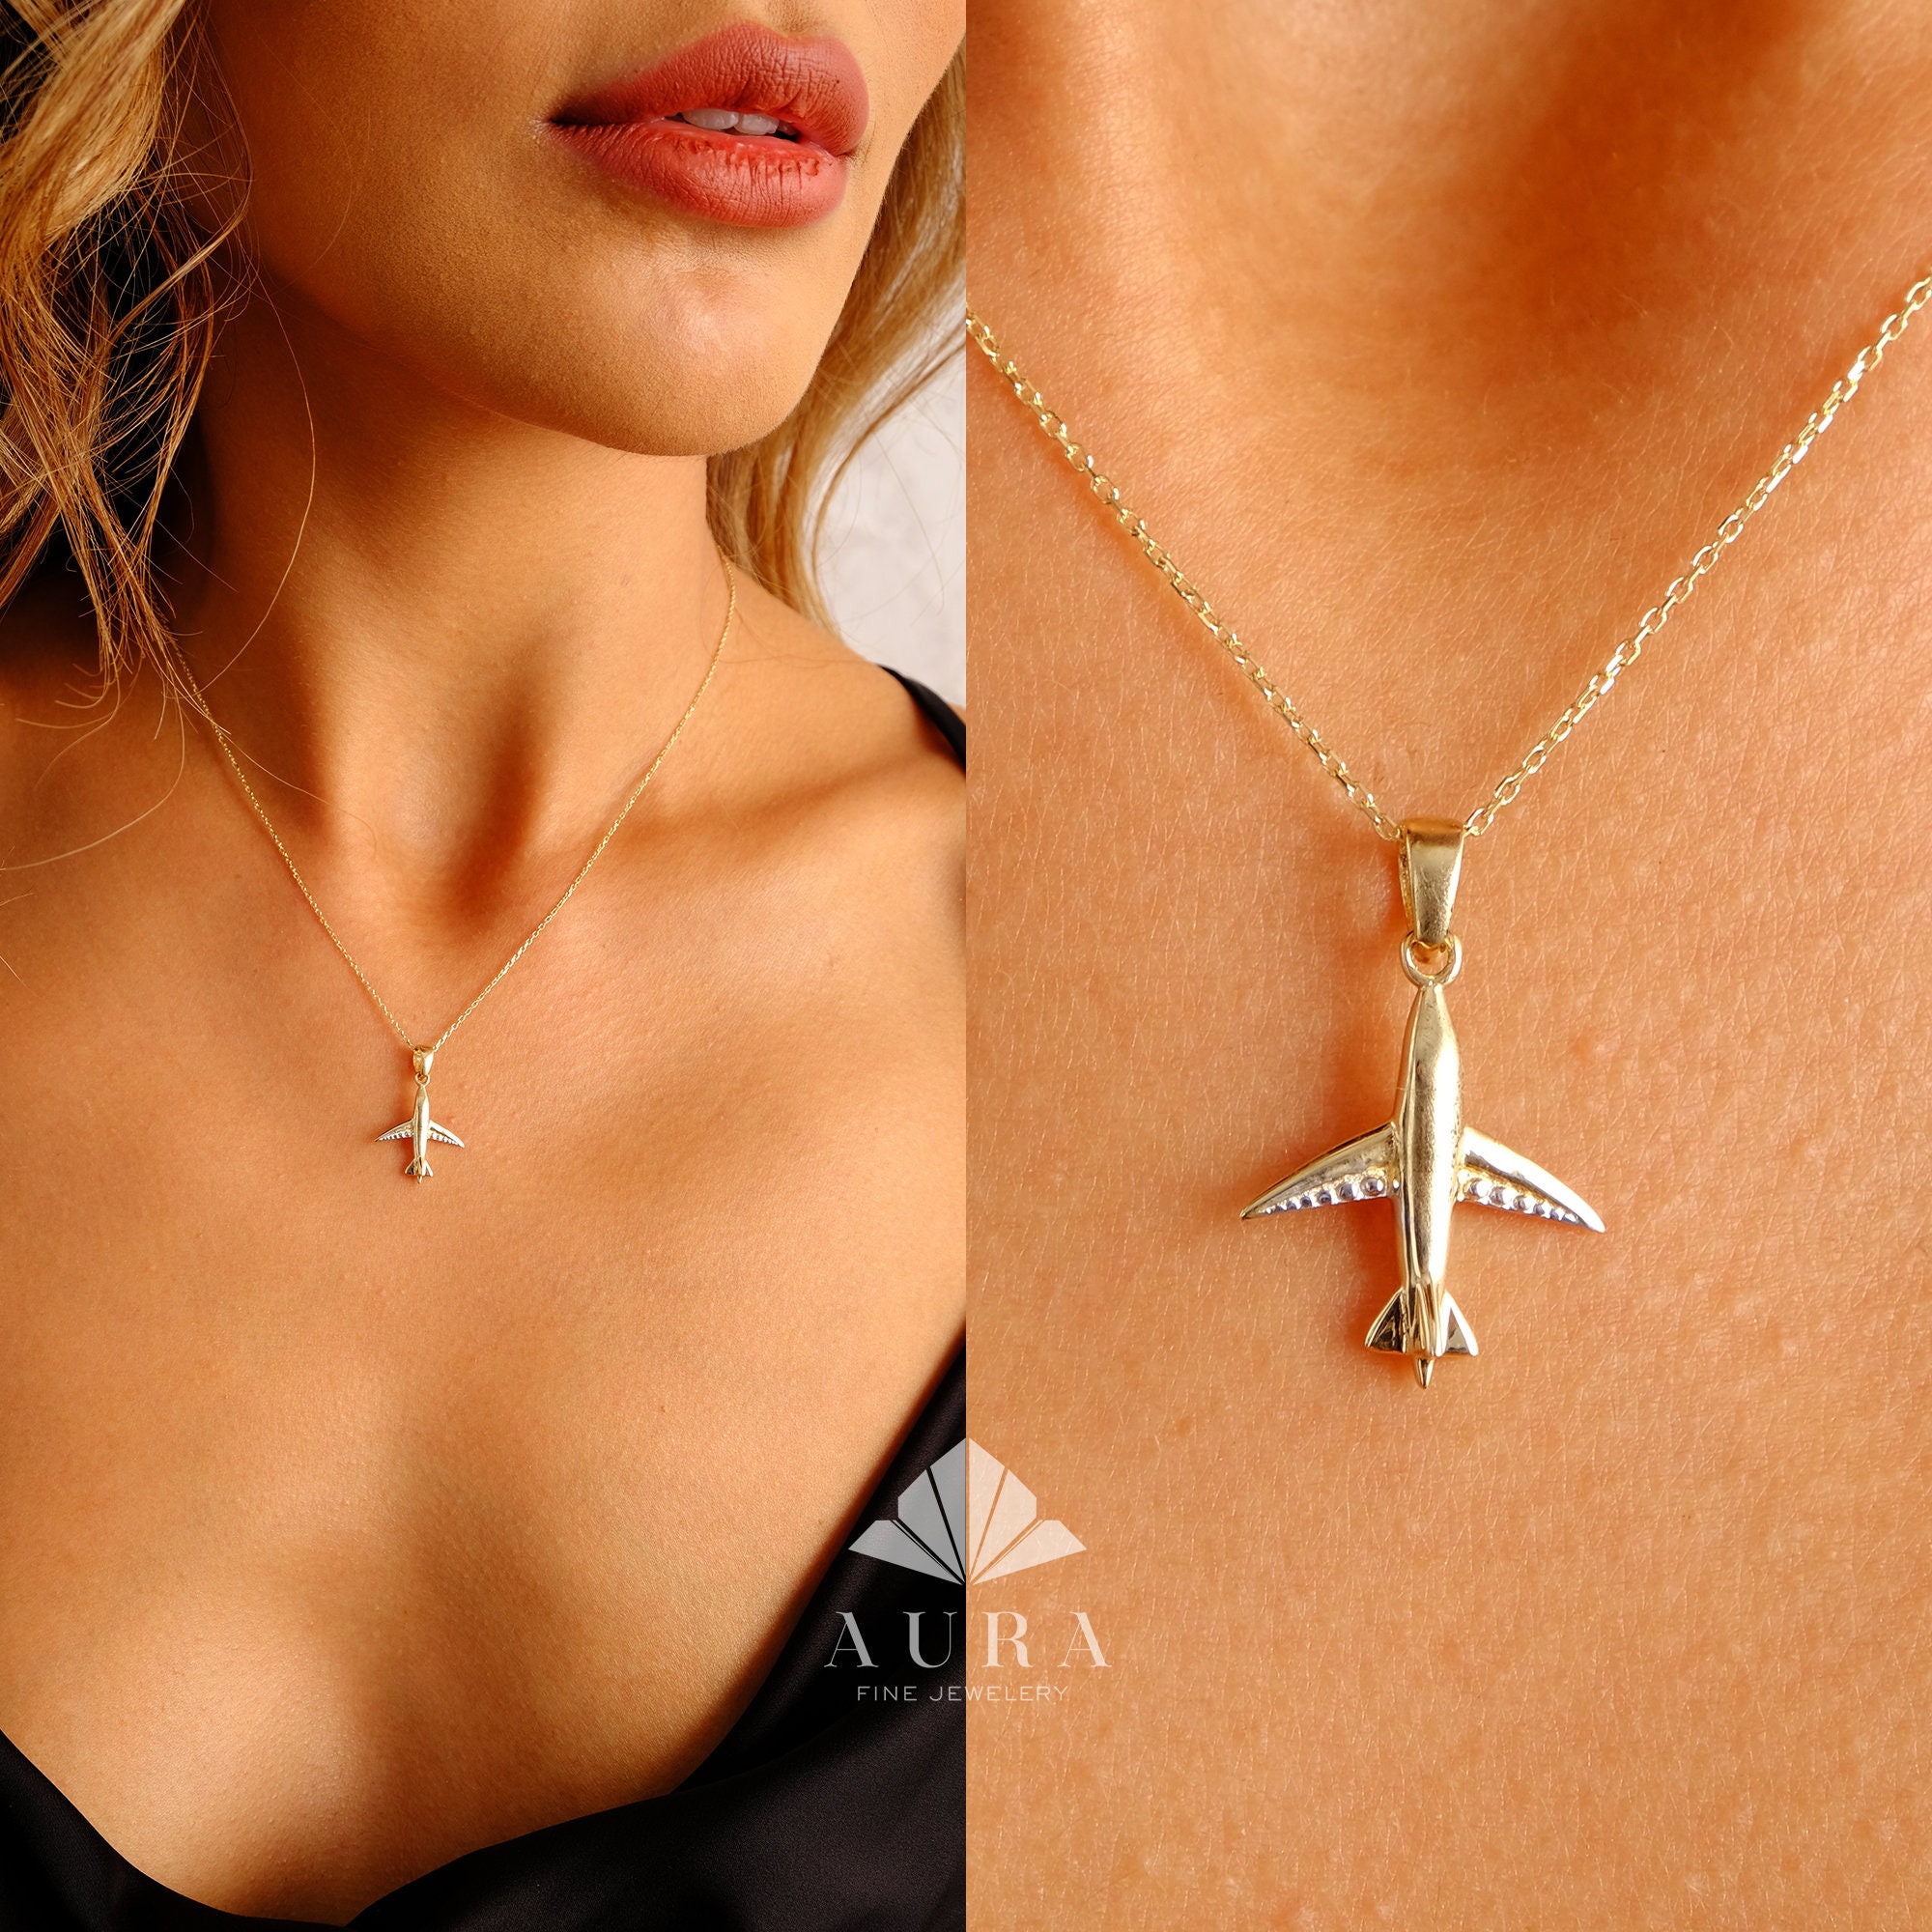 Imported Staple - Dainty Airplane necklace 18k Gold Php 5,500 | Facebook